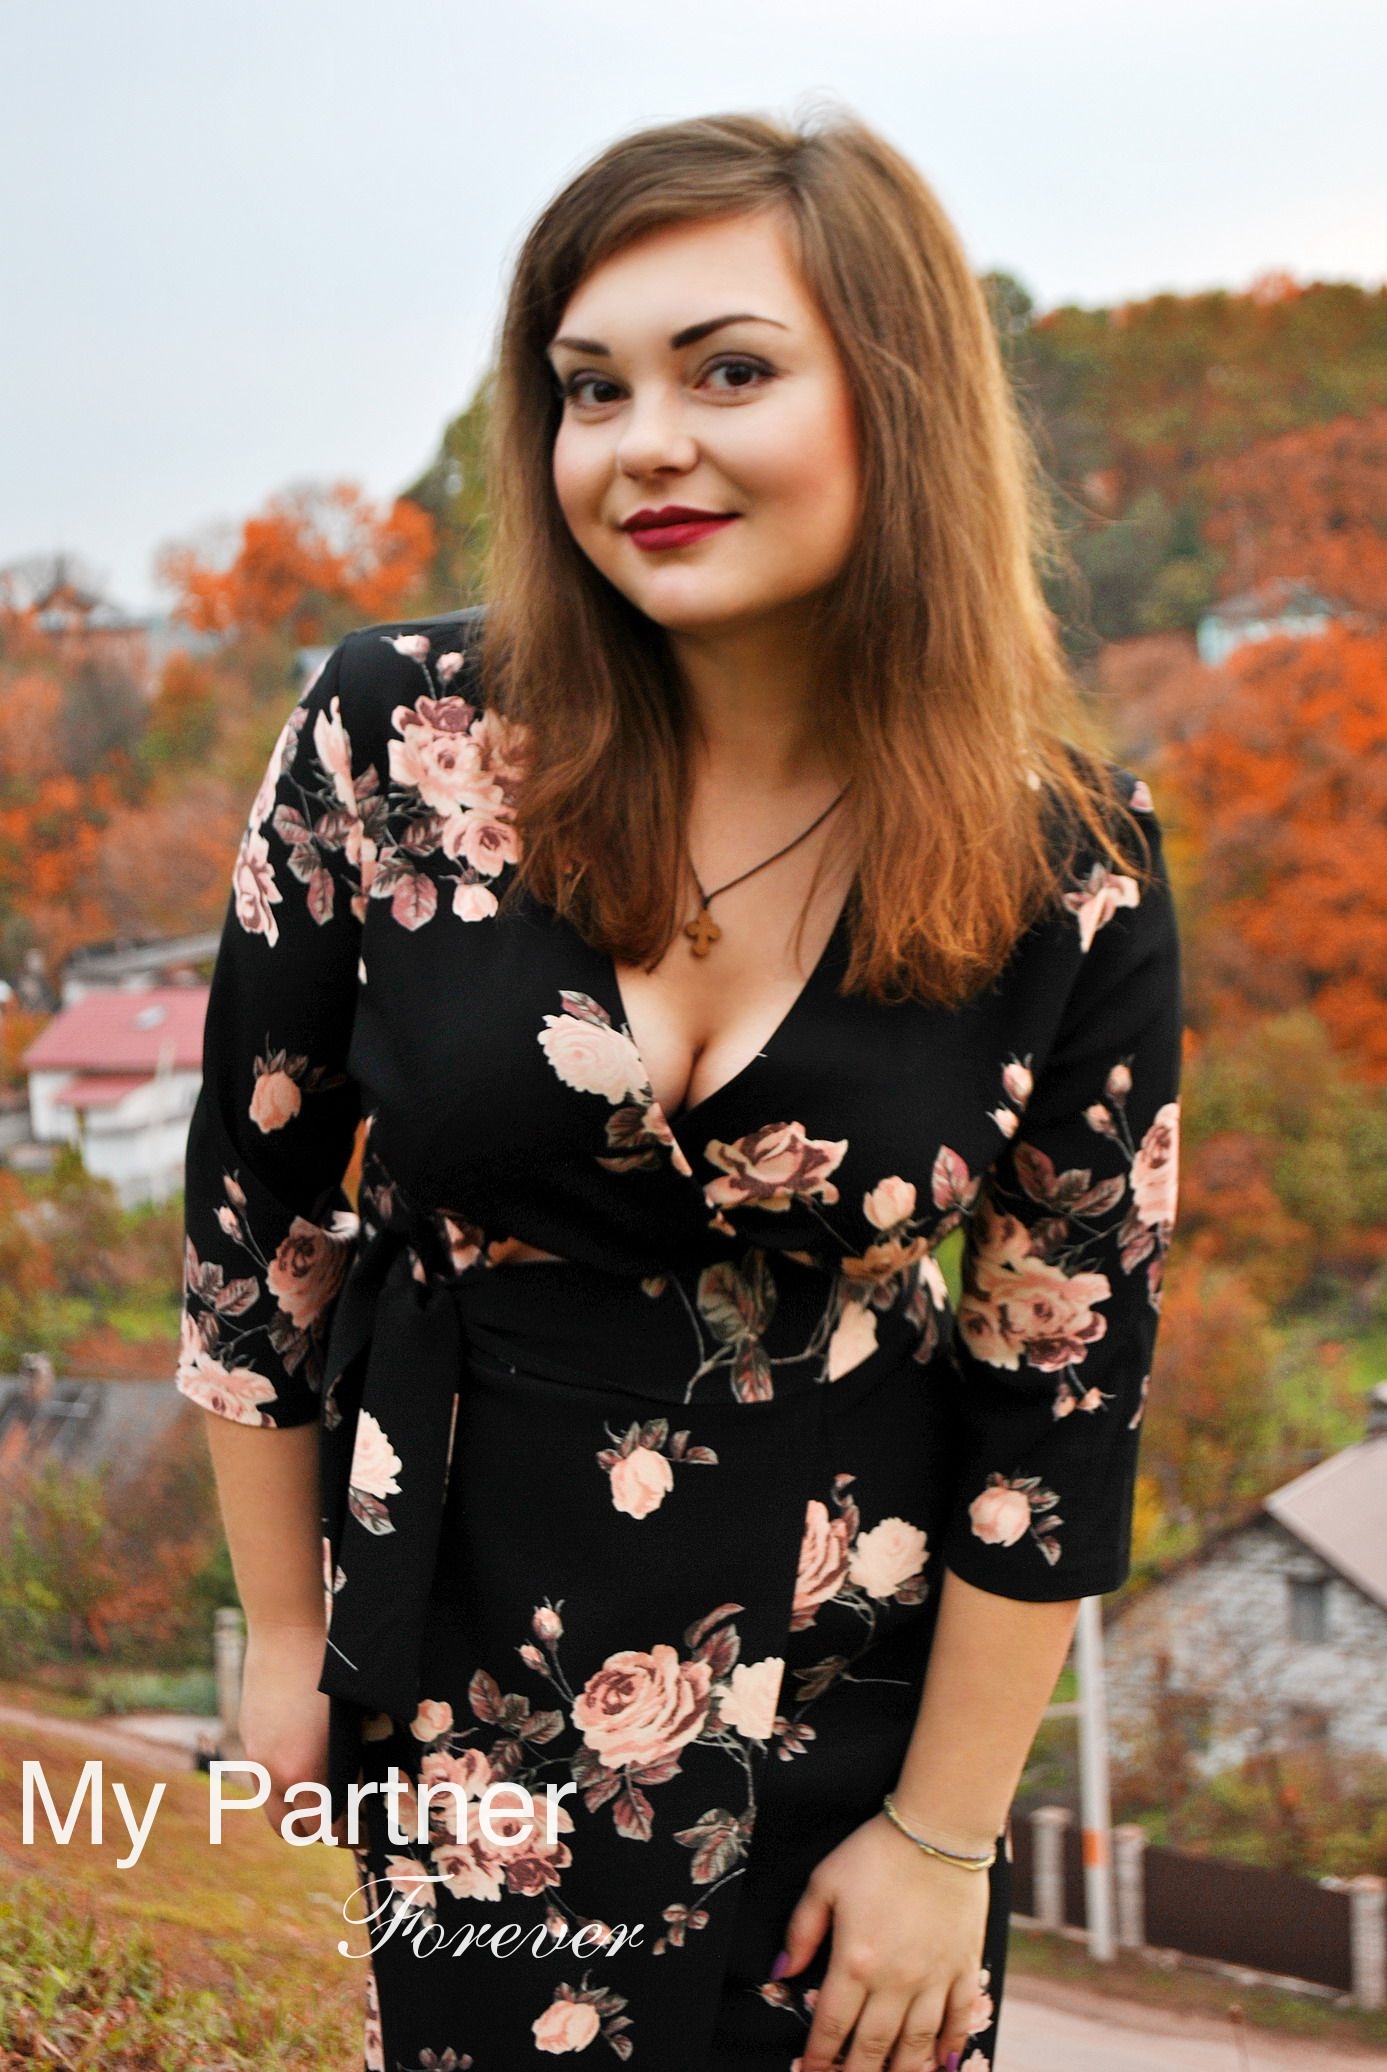 Gorgeous Belarusian Woman Anna from Grodno, Belarus